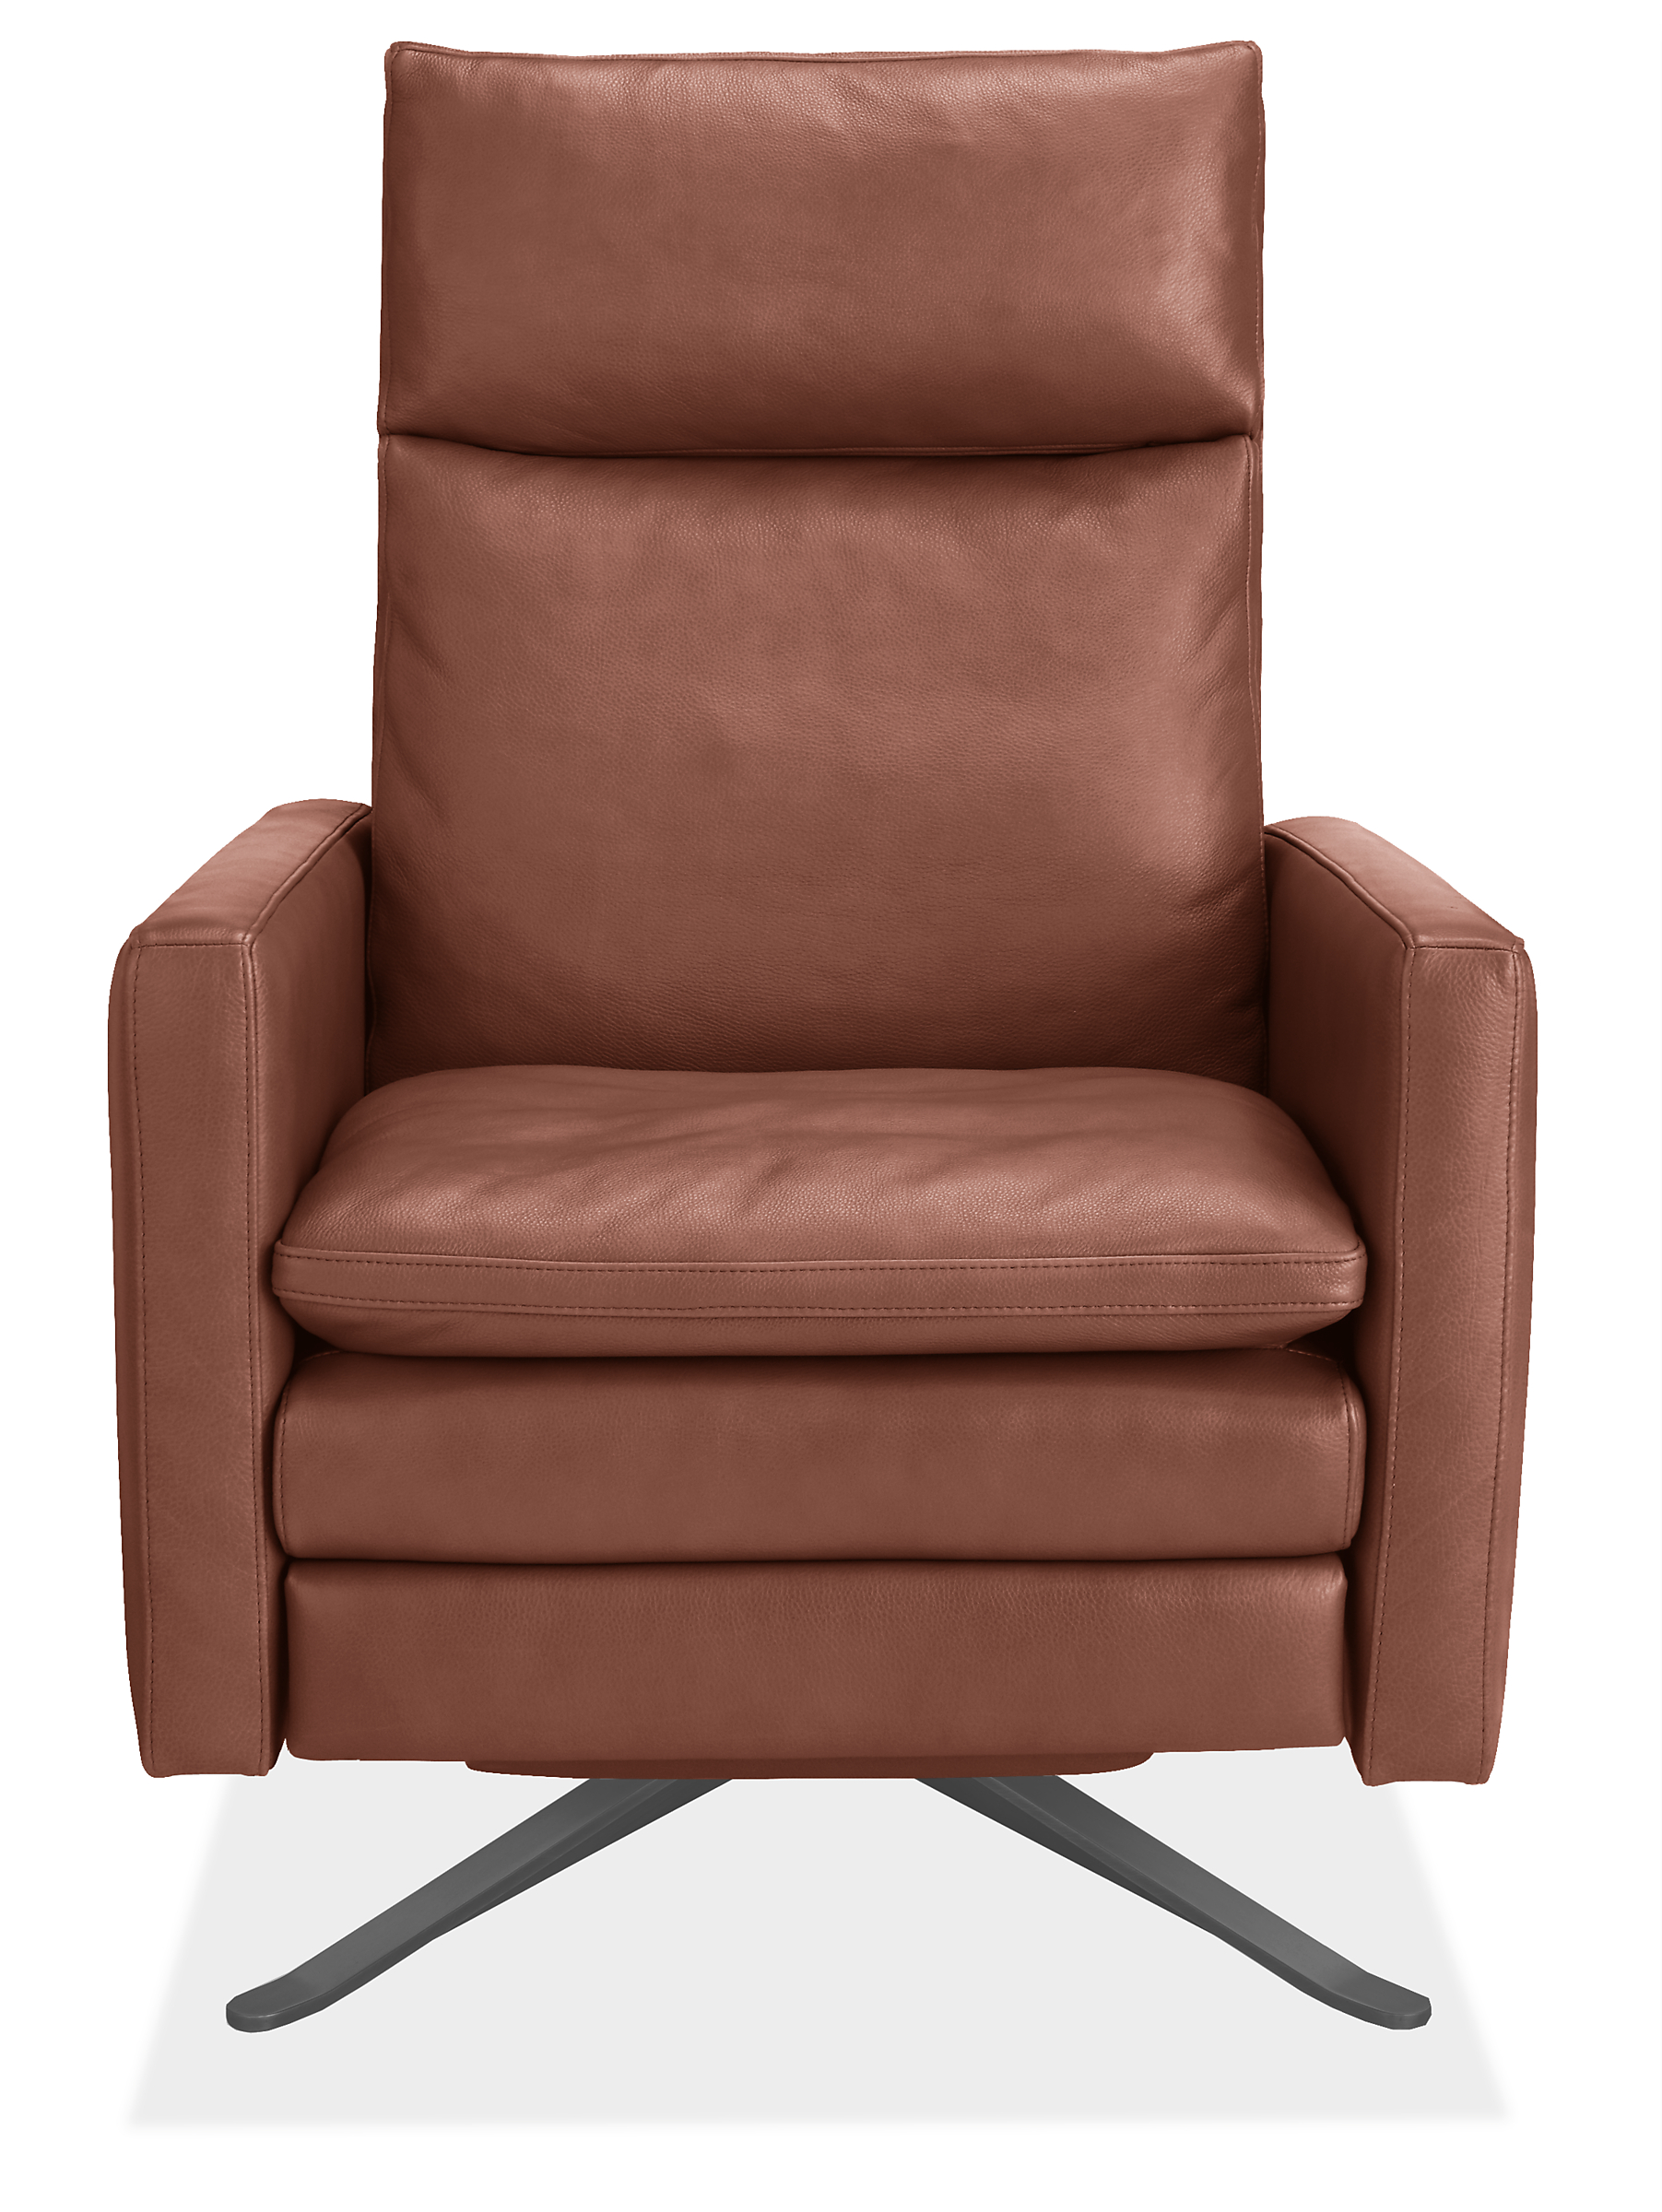 Isaac Power Recliner Thin-Arm in Urbino Terracotta Leather with Swivel Base